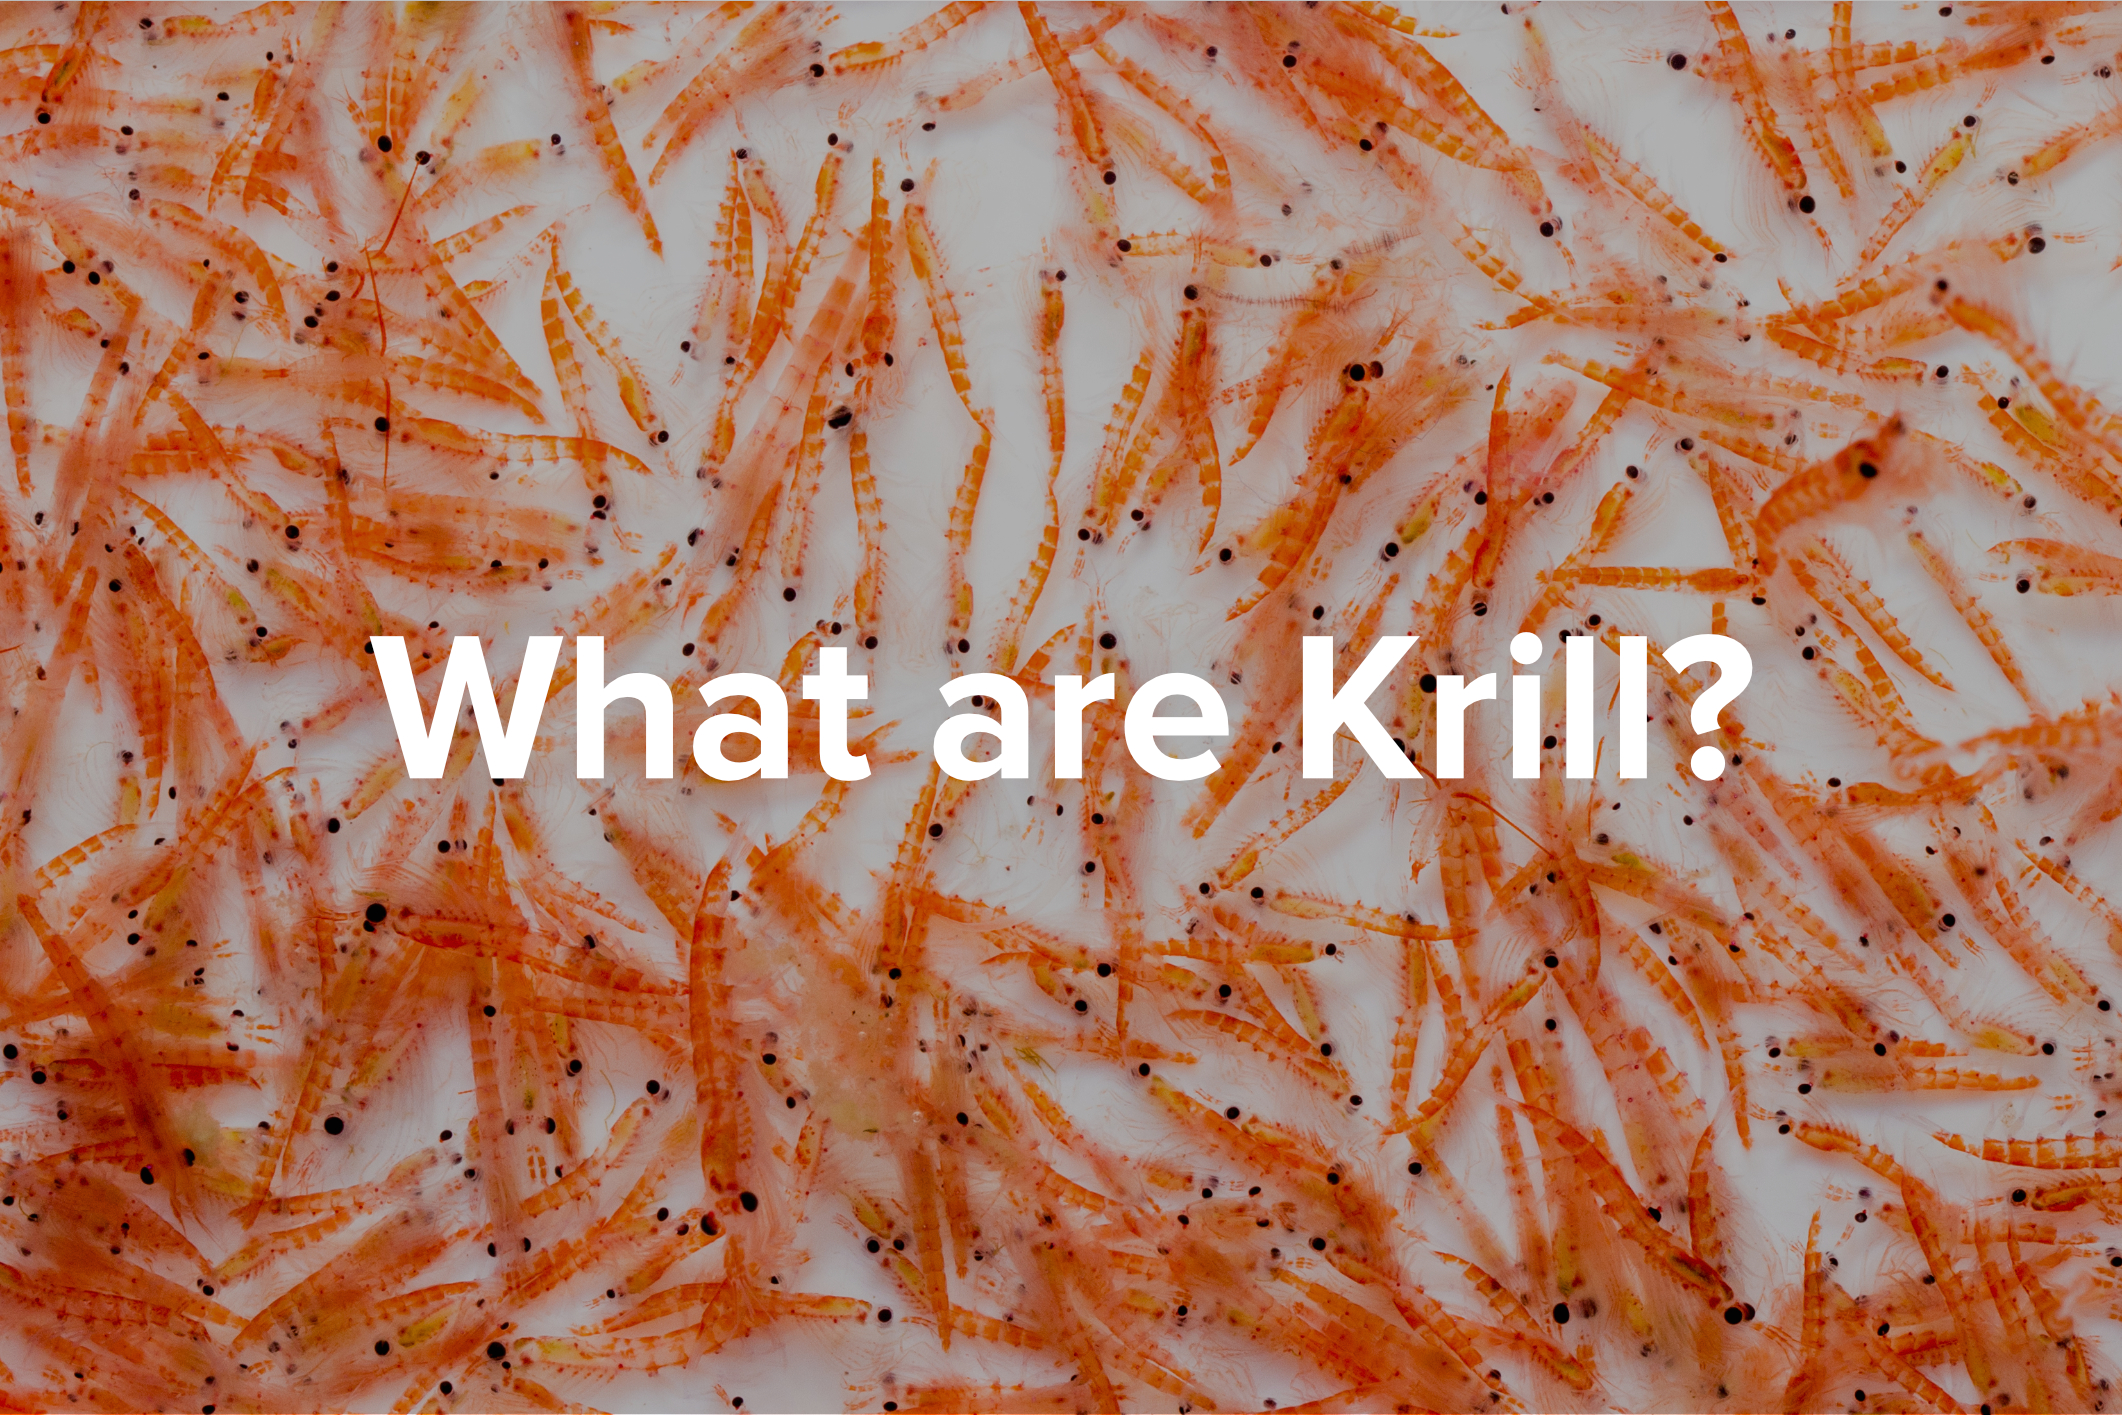 What are Krill?